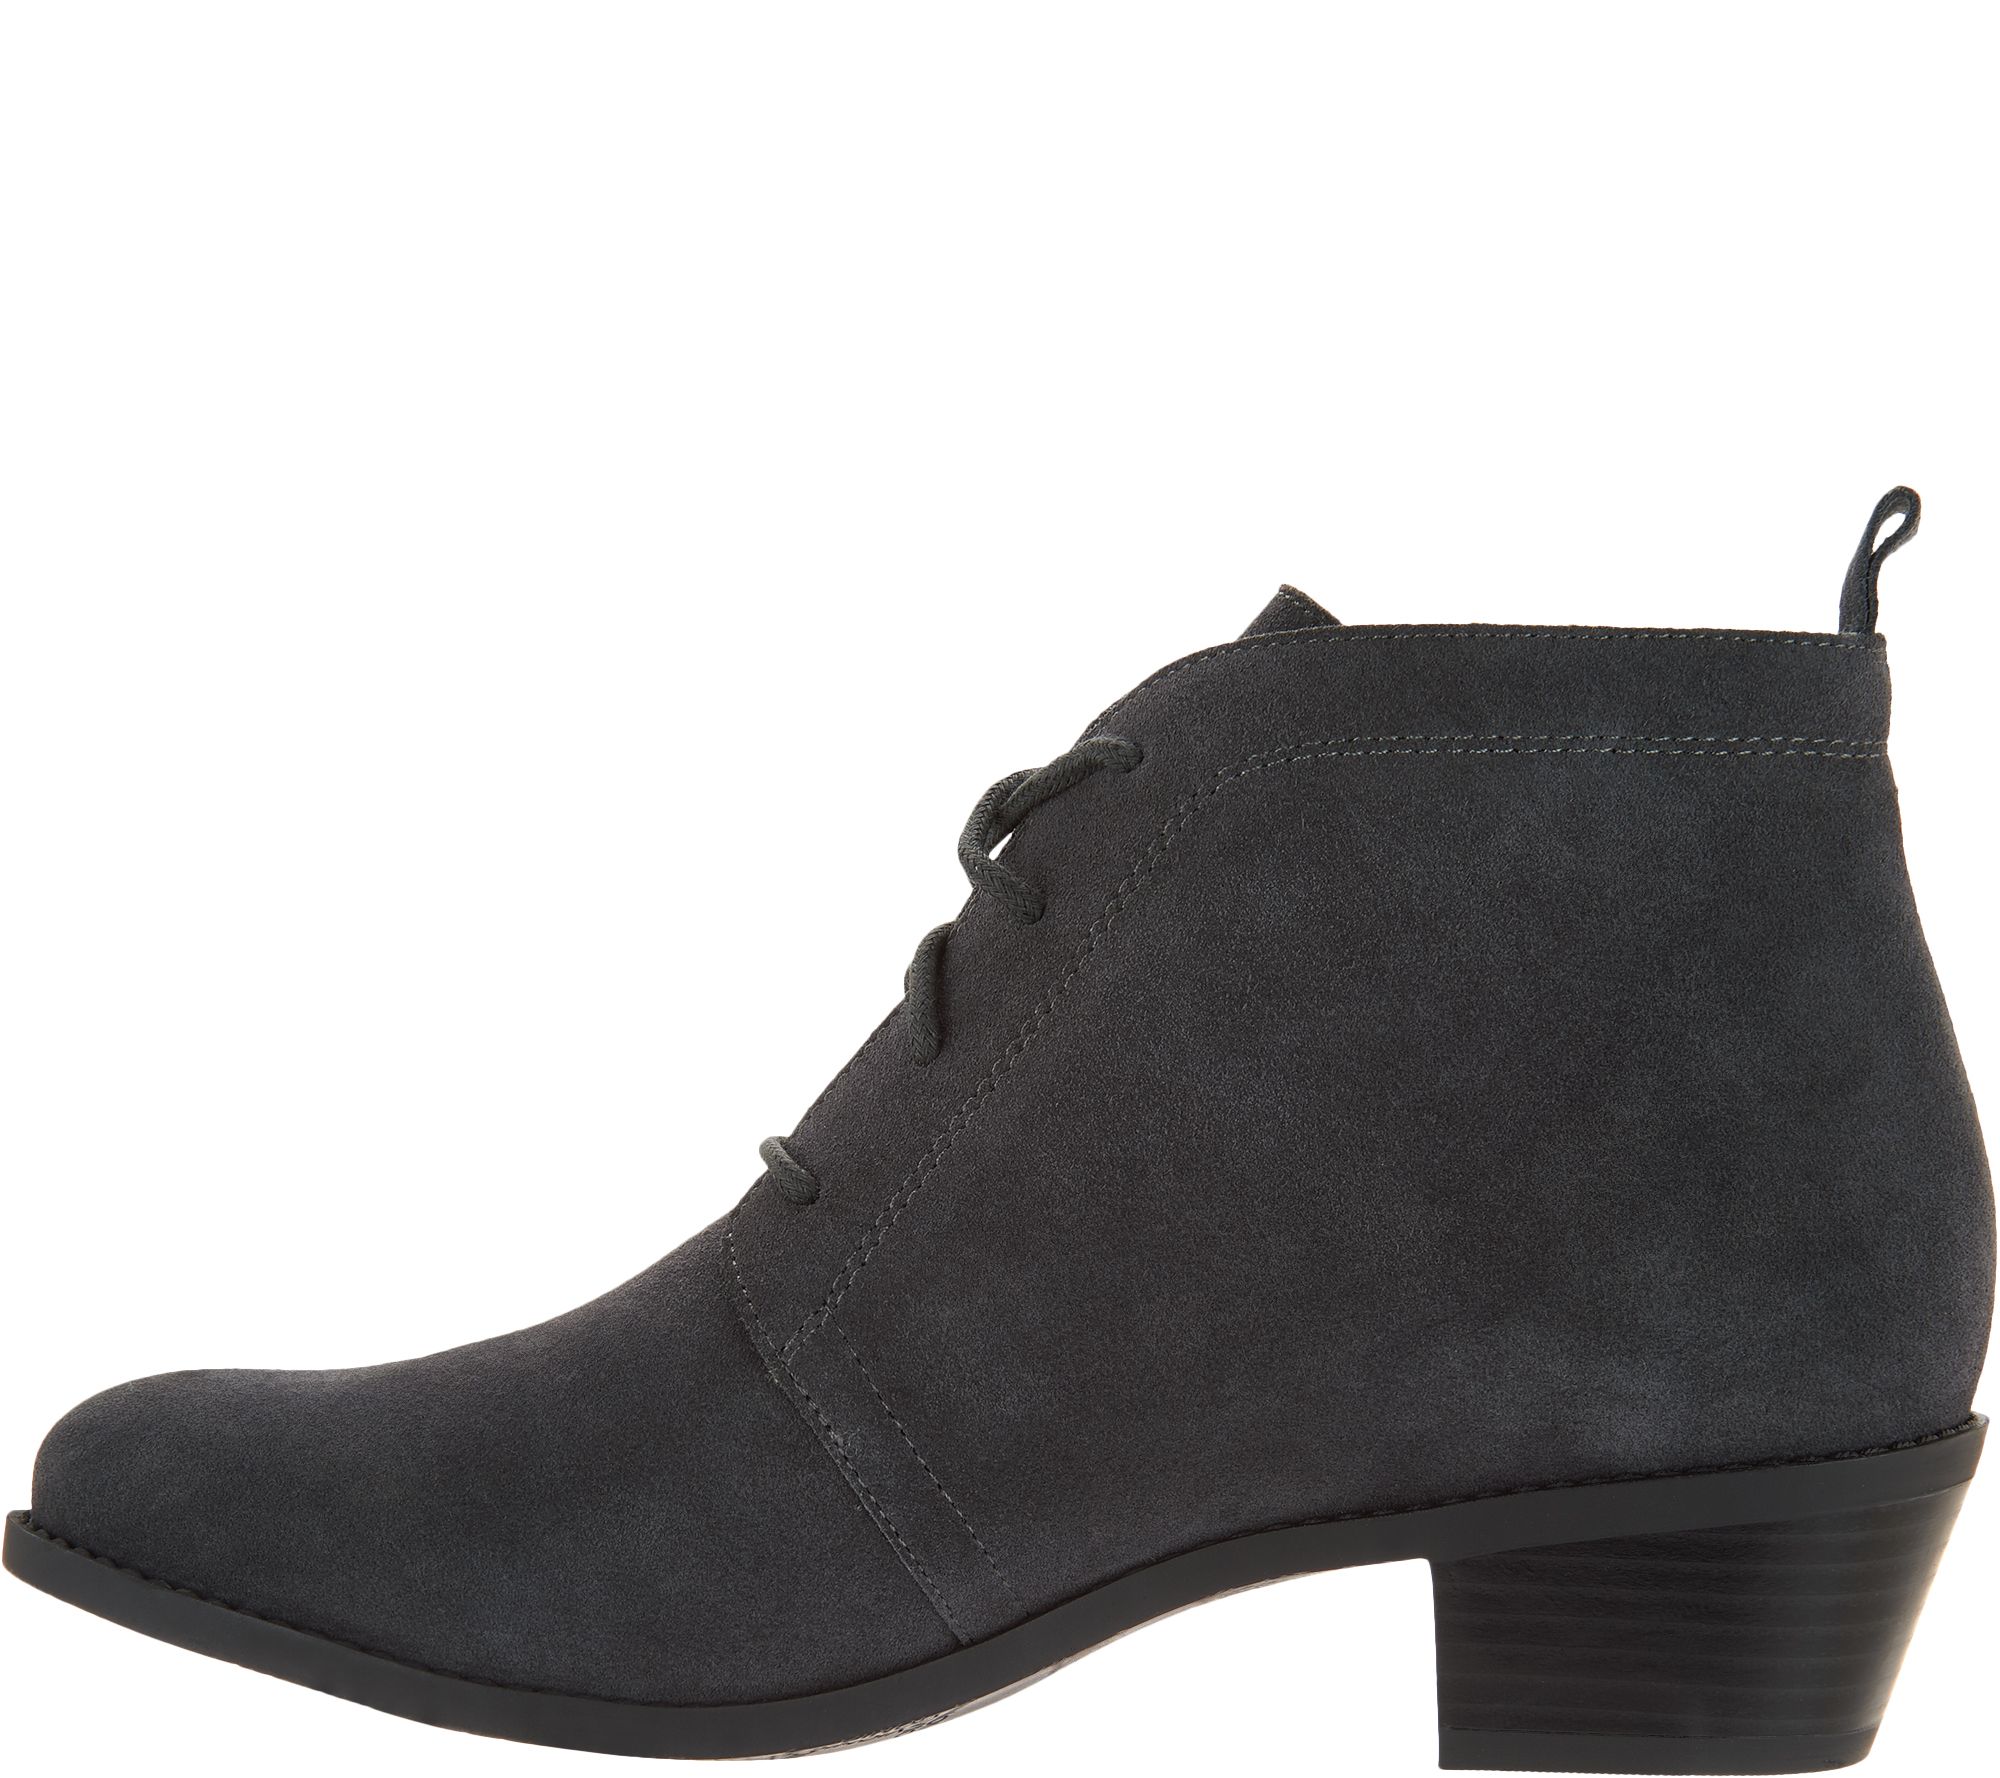 Vionic Suede Lace-up Ankle Boots - Andi - QVC.com